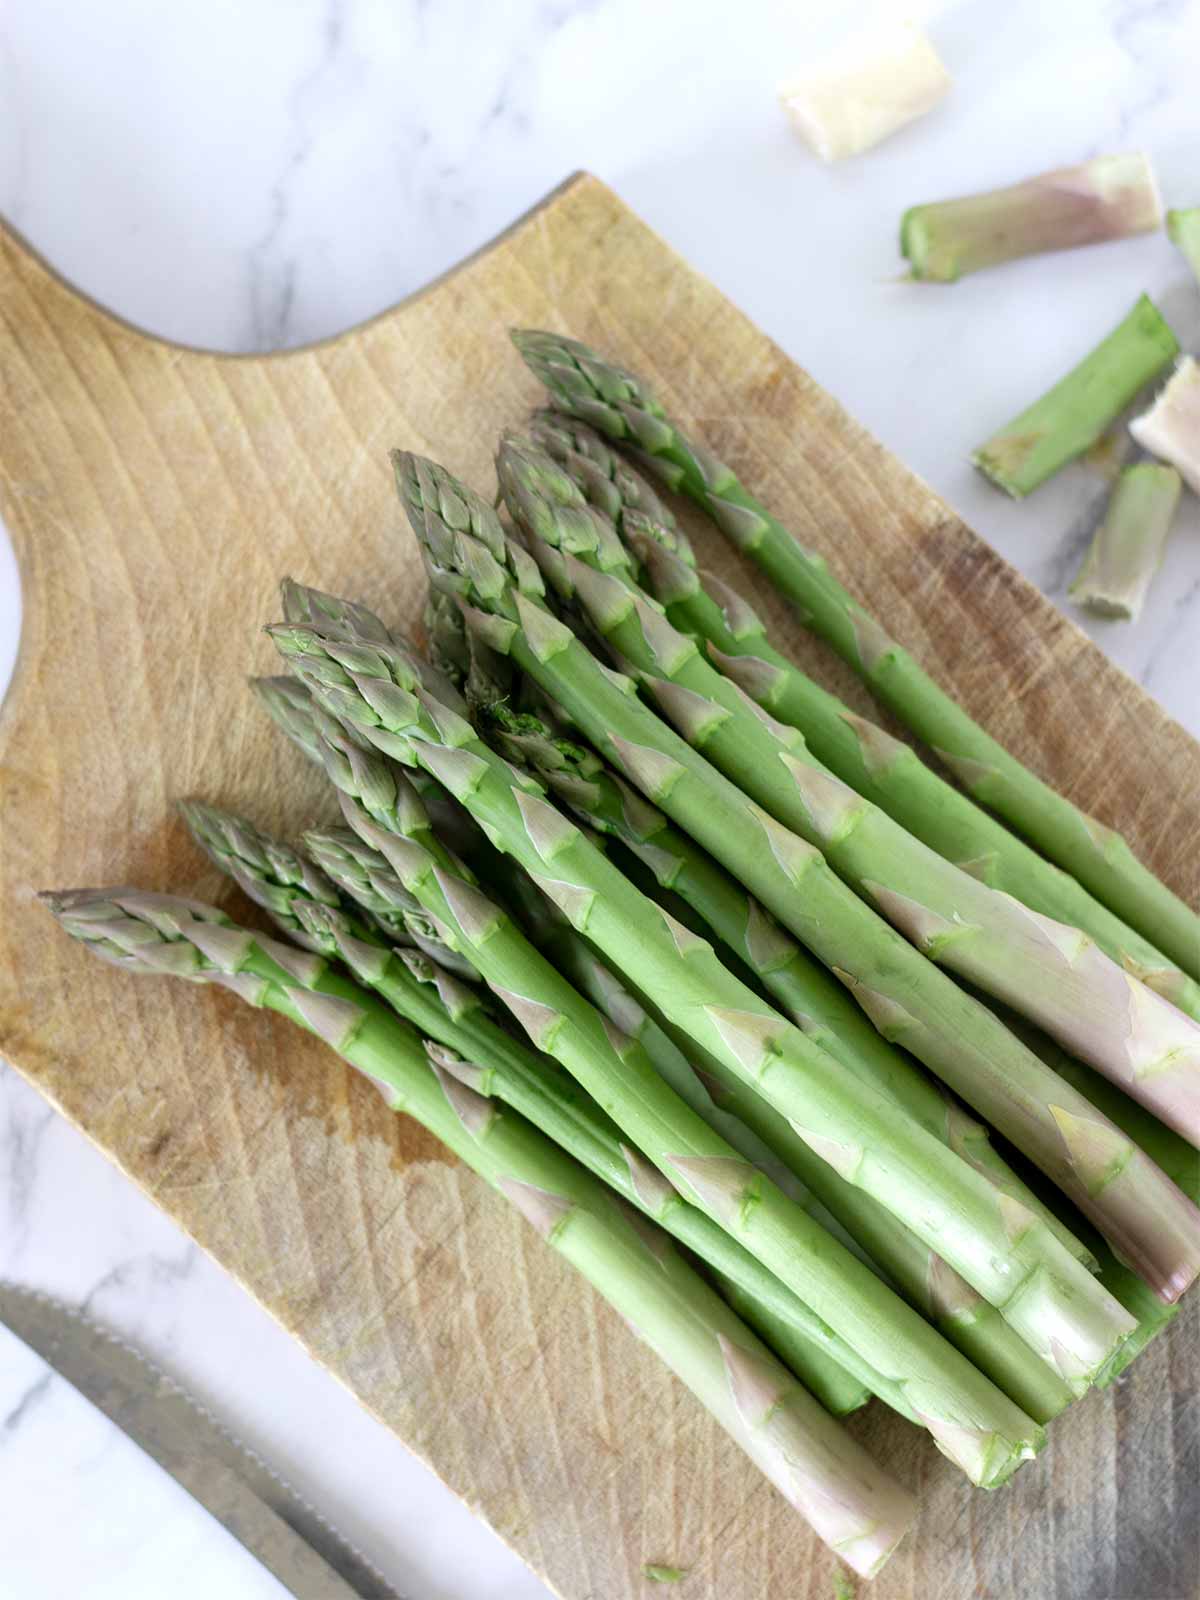 Fresh asparagus stalks on wooden cutting board with sliced bottom parts